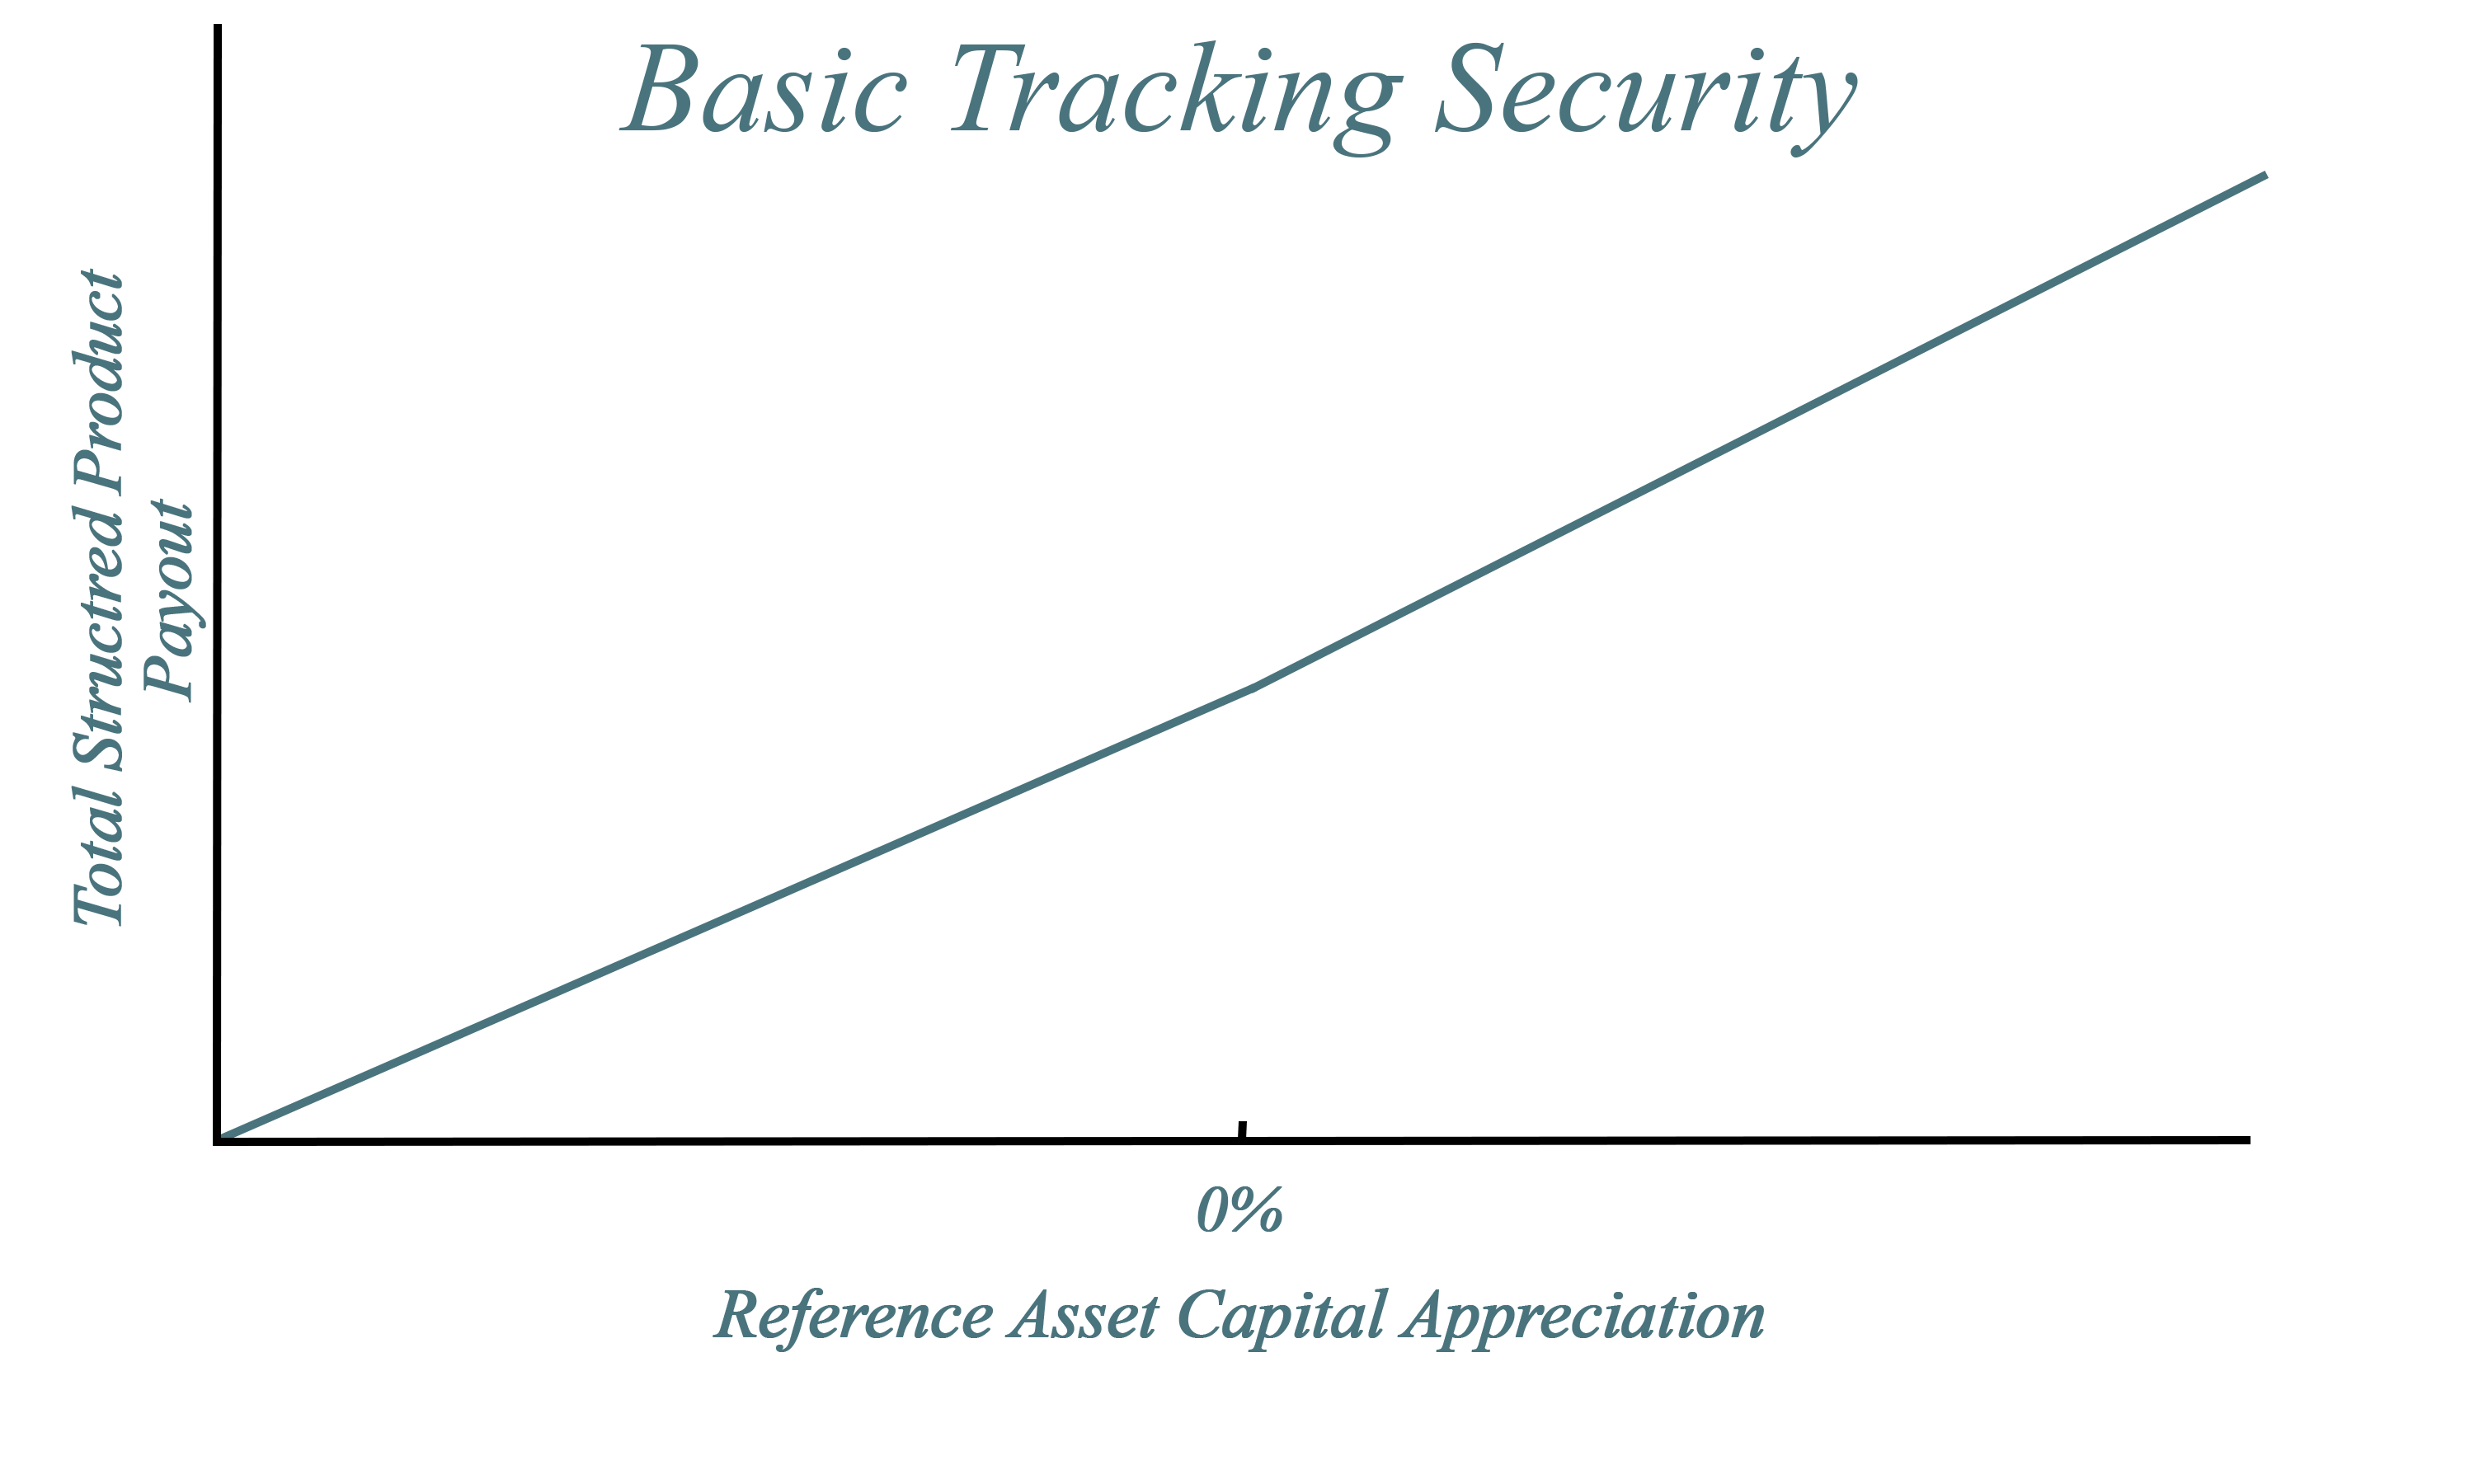 A graph demonstrating payout over capital appreciation for Basic Tracking Securities